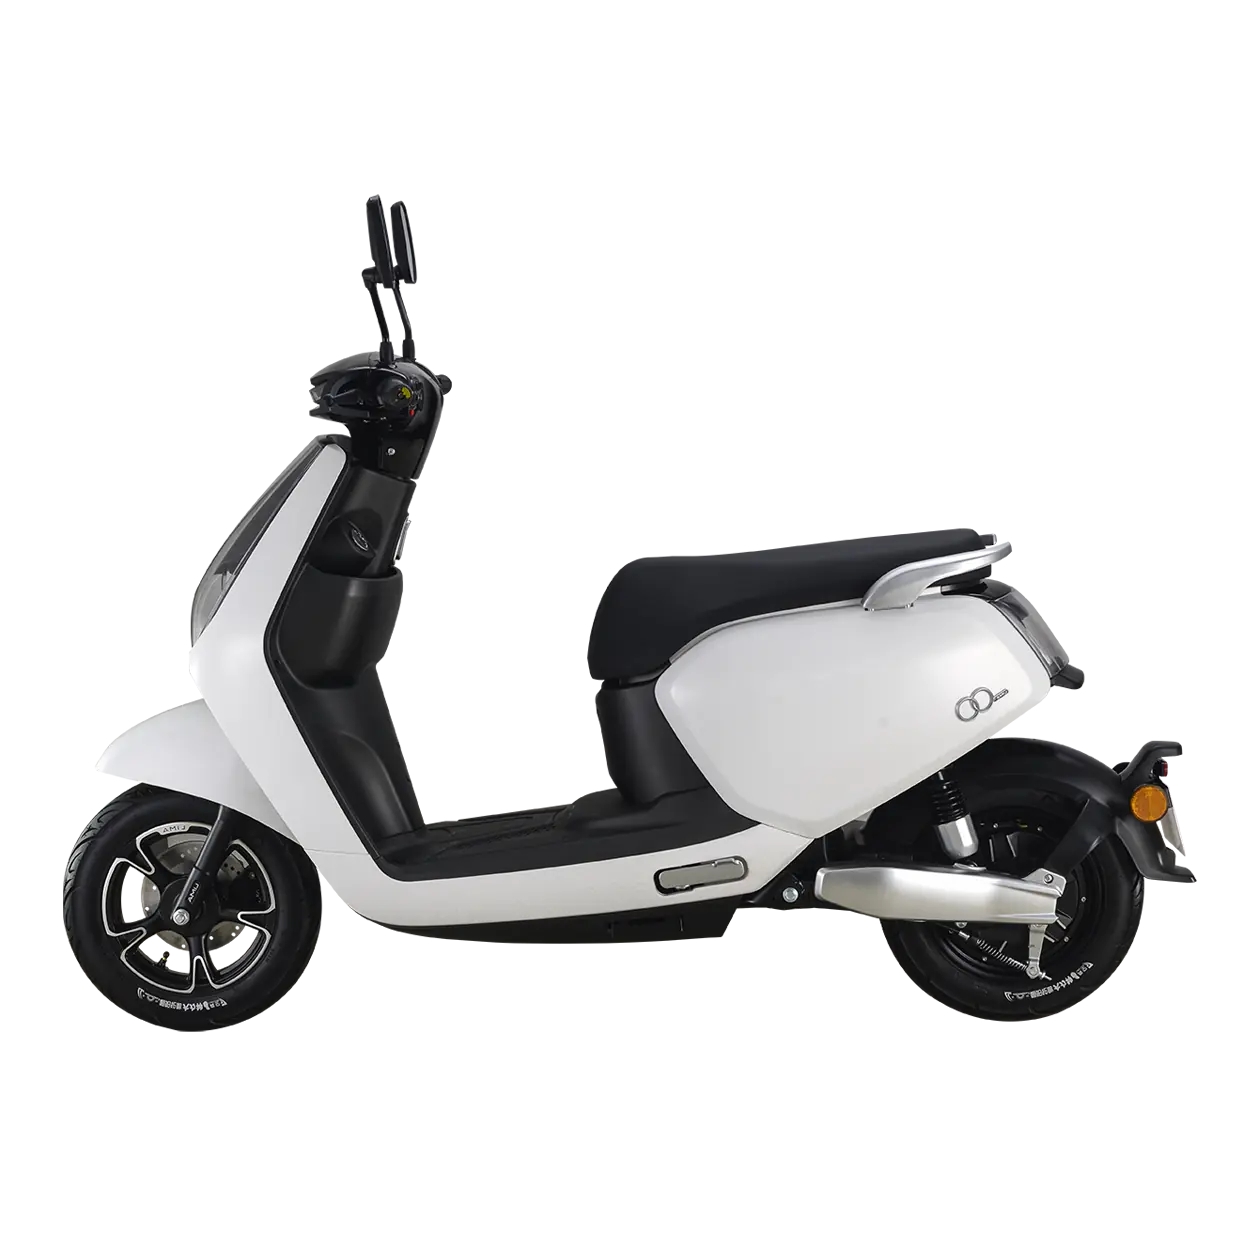 L1e EEC/COC Approval Electric Moped With Lithium Battery Version